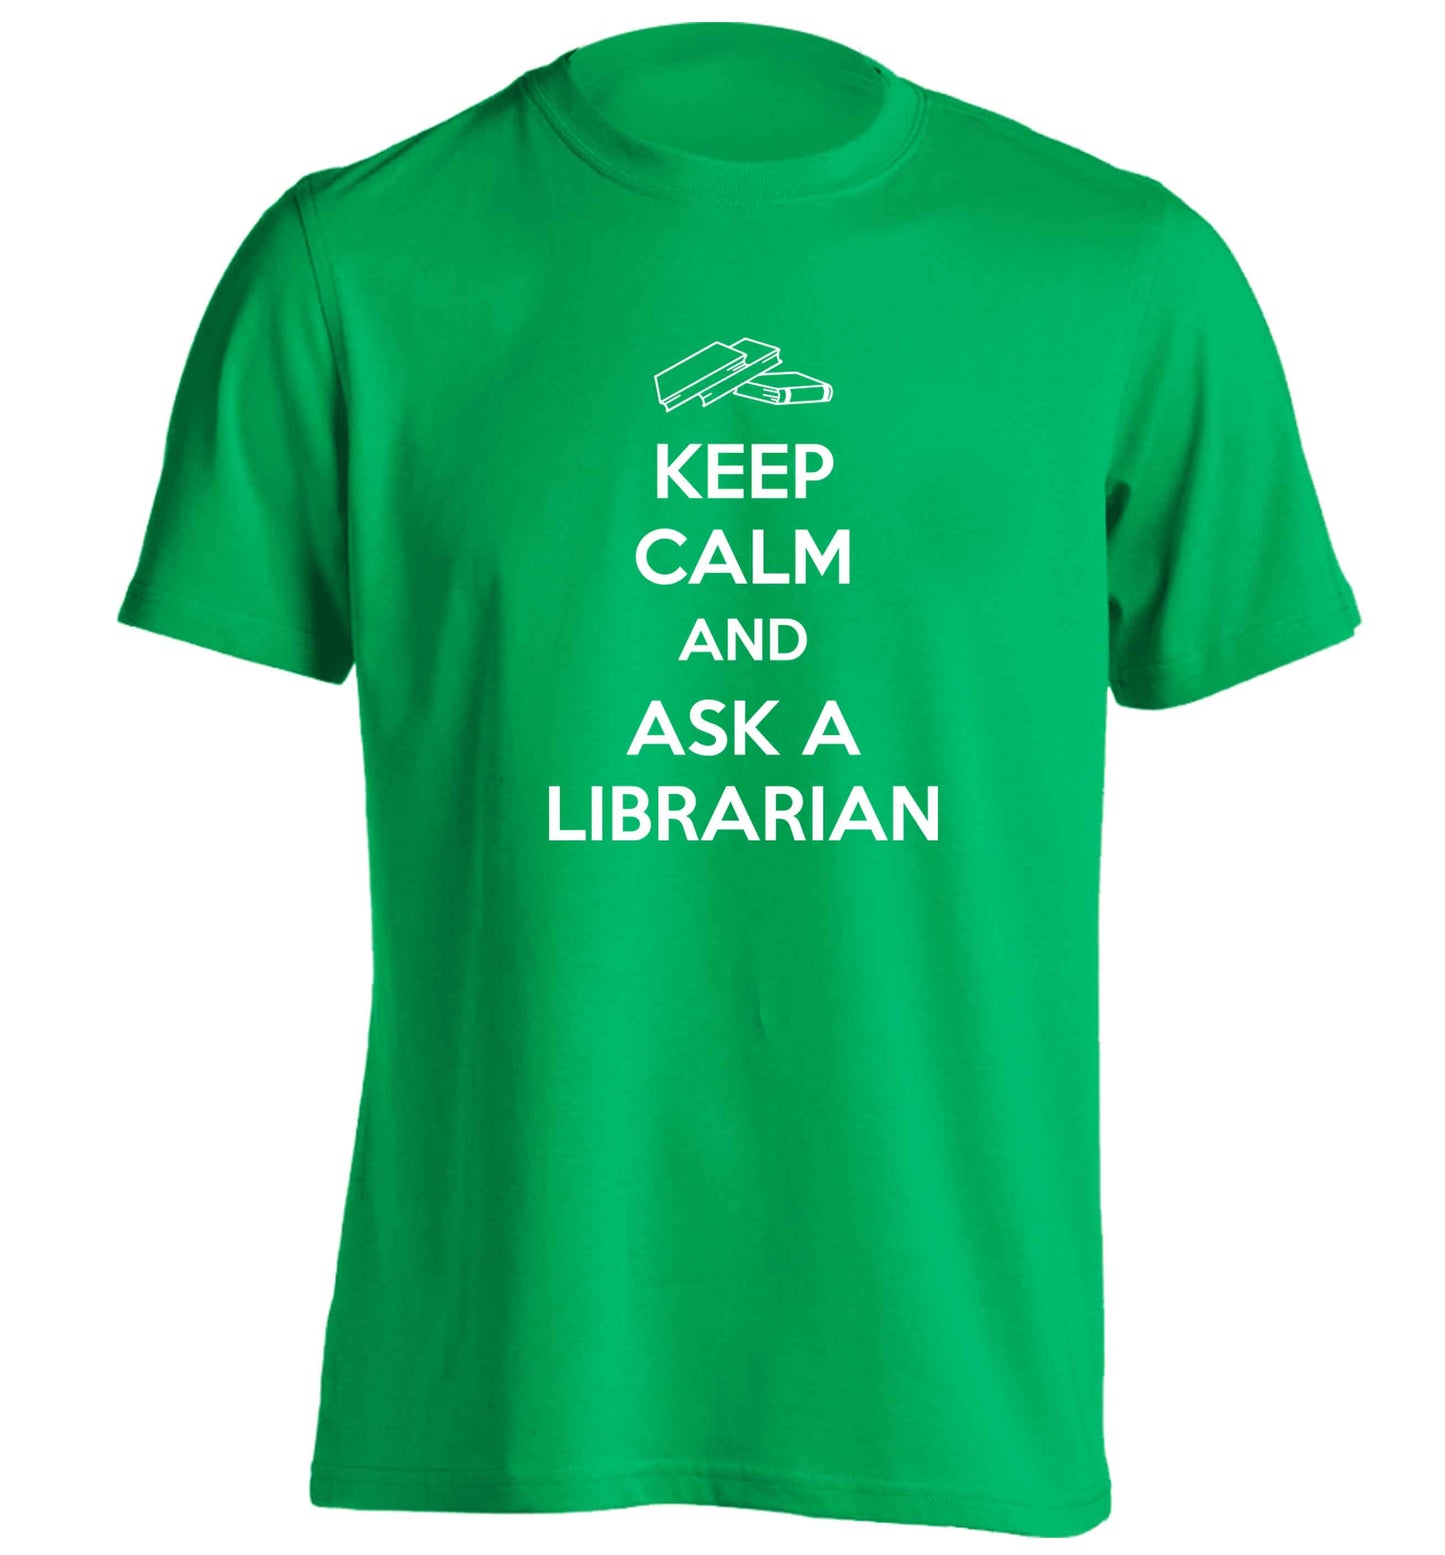 Keep calm and ask a librarian adults unisex green Tshirt 2XL